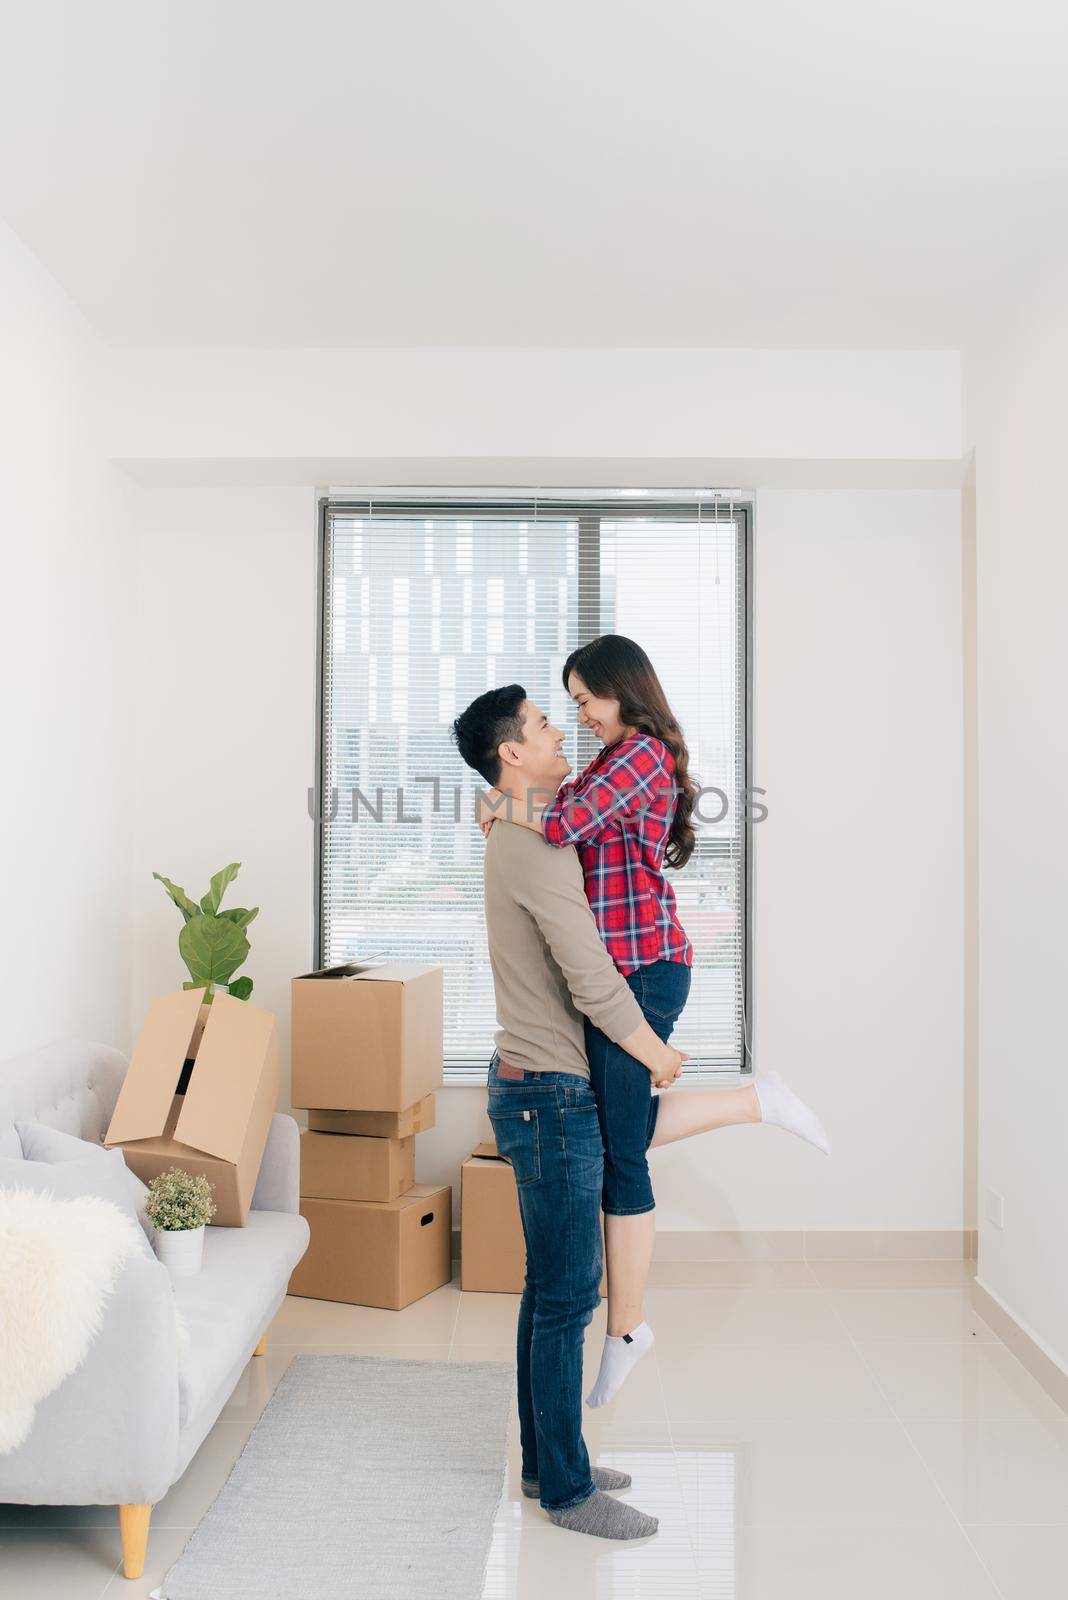 Couple moving new home. Happy married people buy new apartment by makidotvn